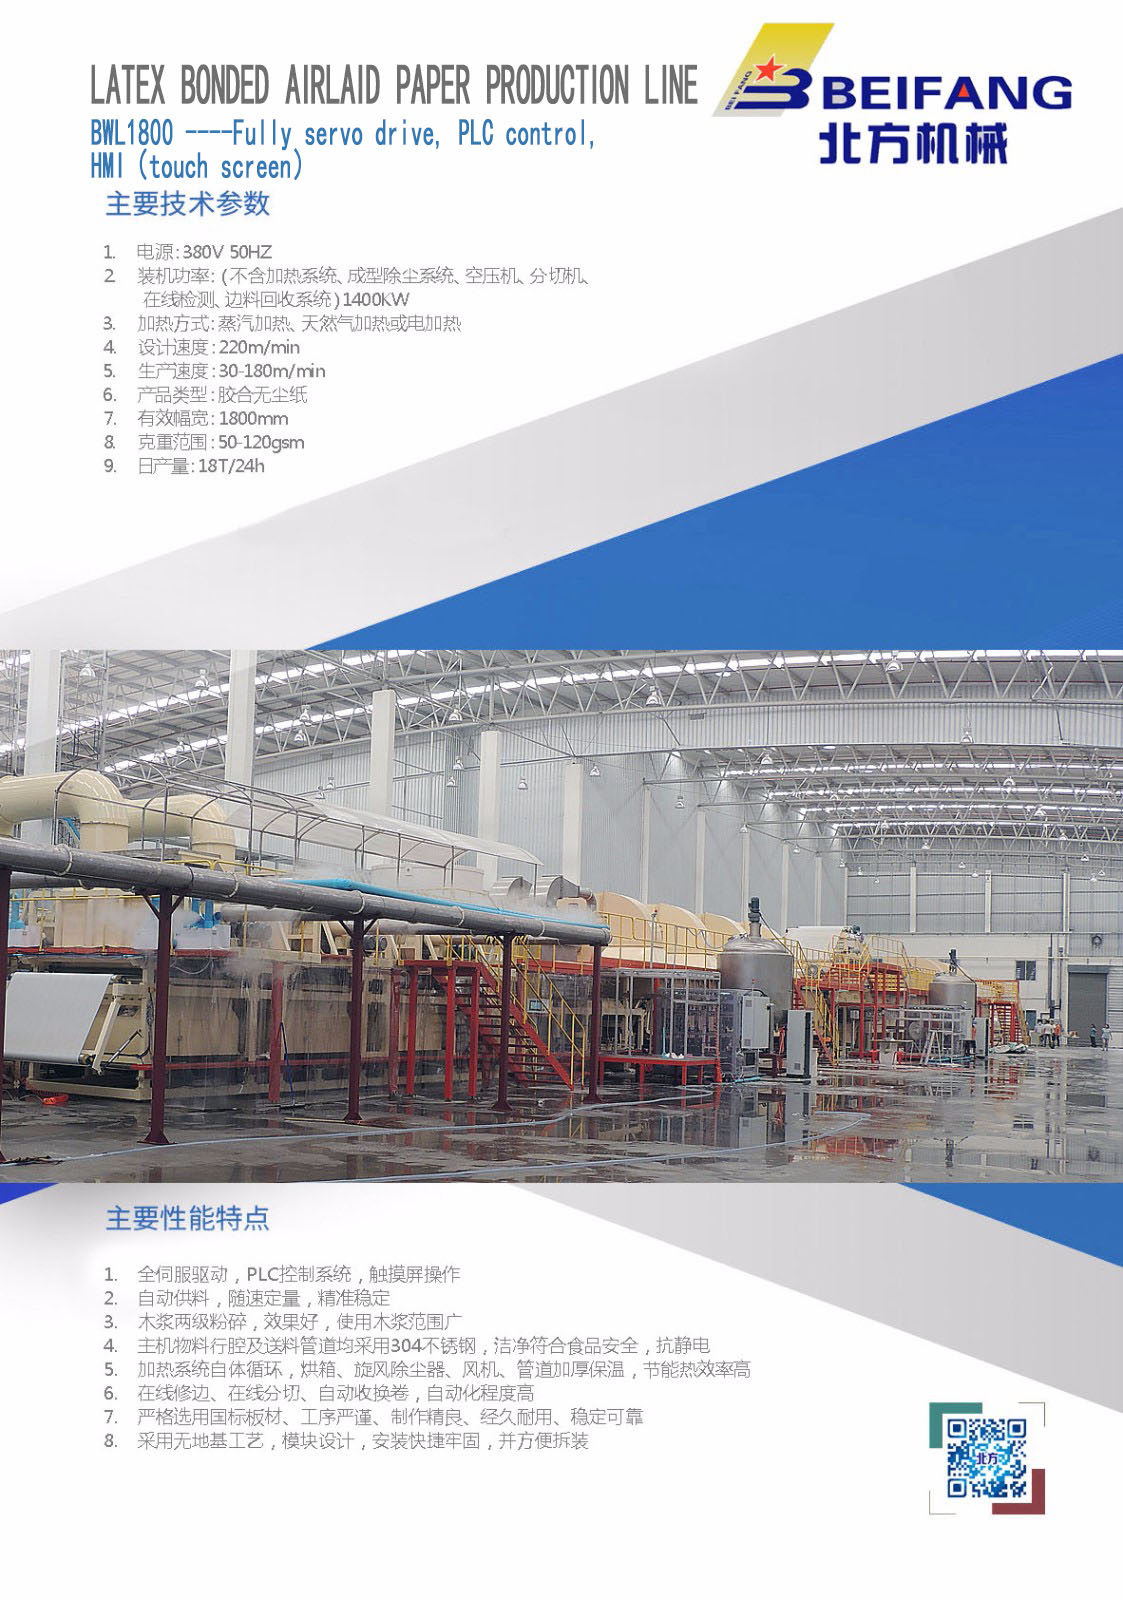 LATEX BONDED AIRLAID PAPER PRODUCTION LINE